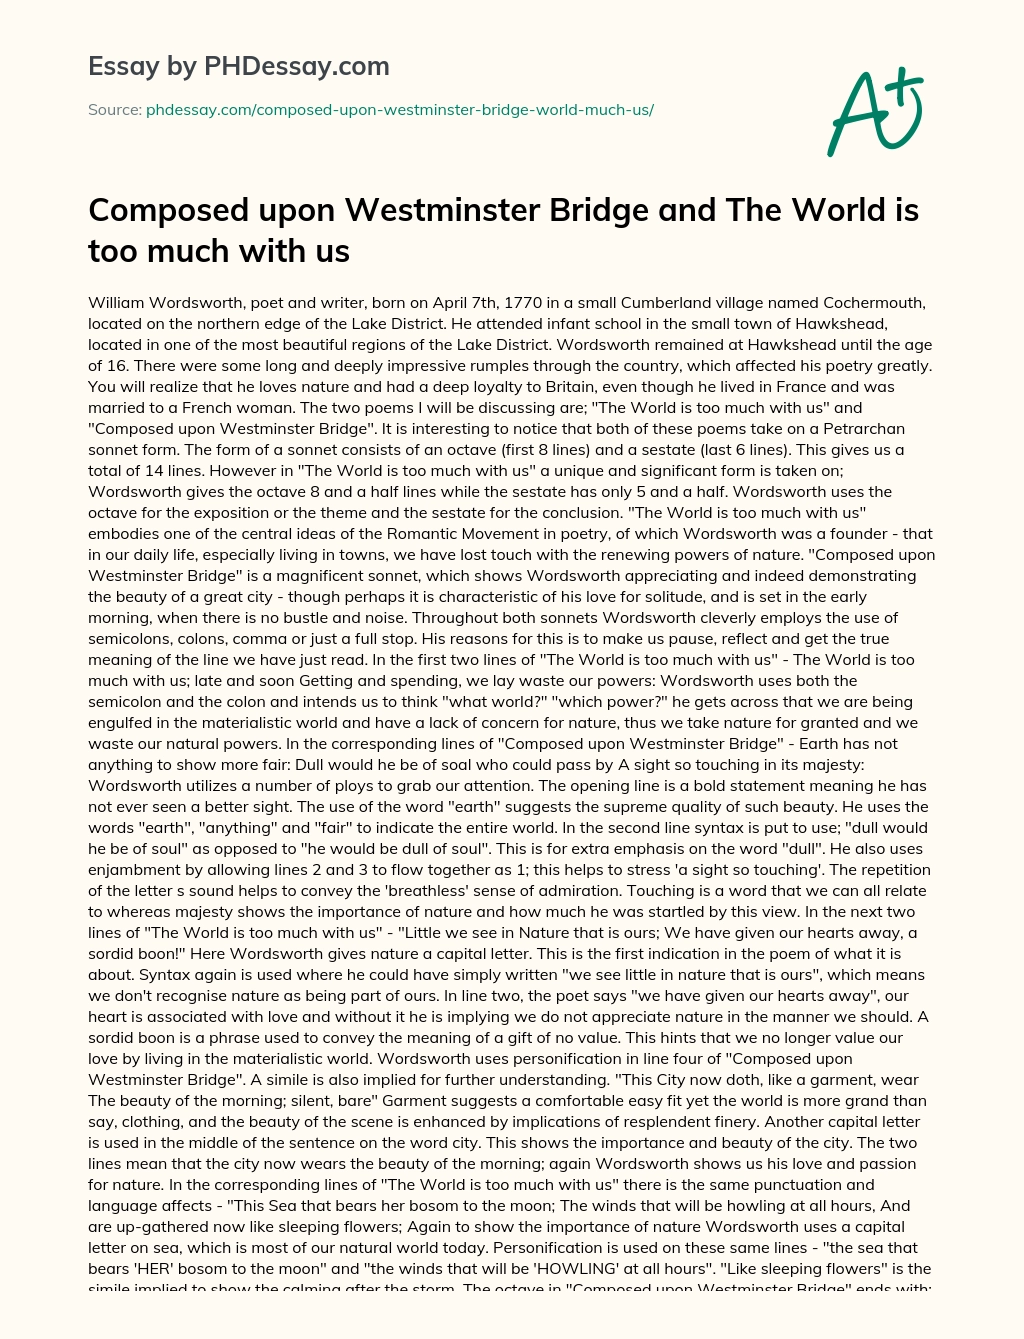 Composed upon Westminster Bridge and The World is too much with us essay